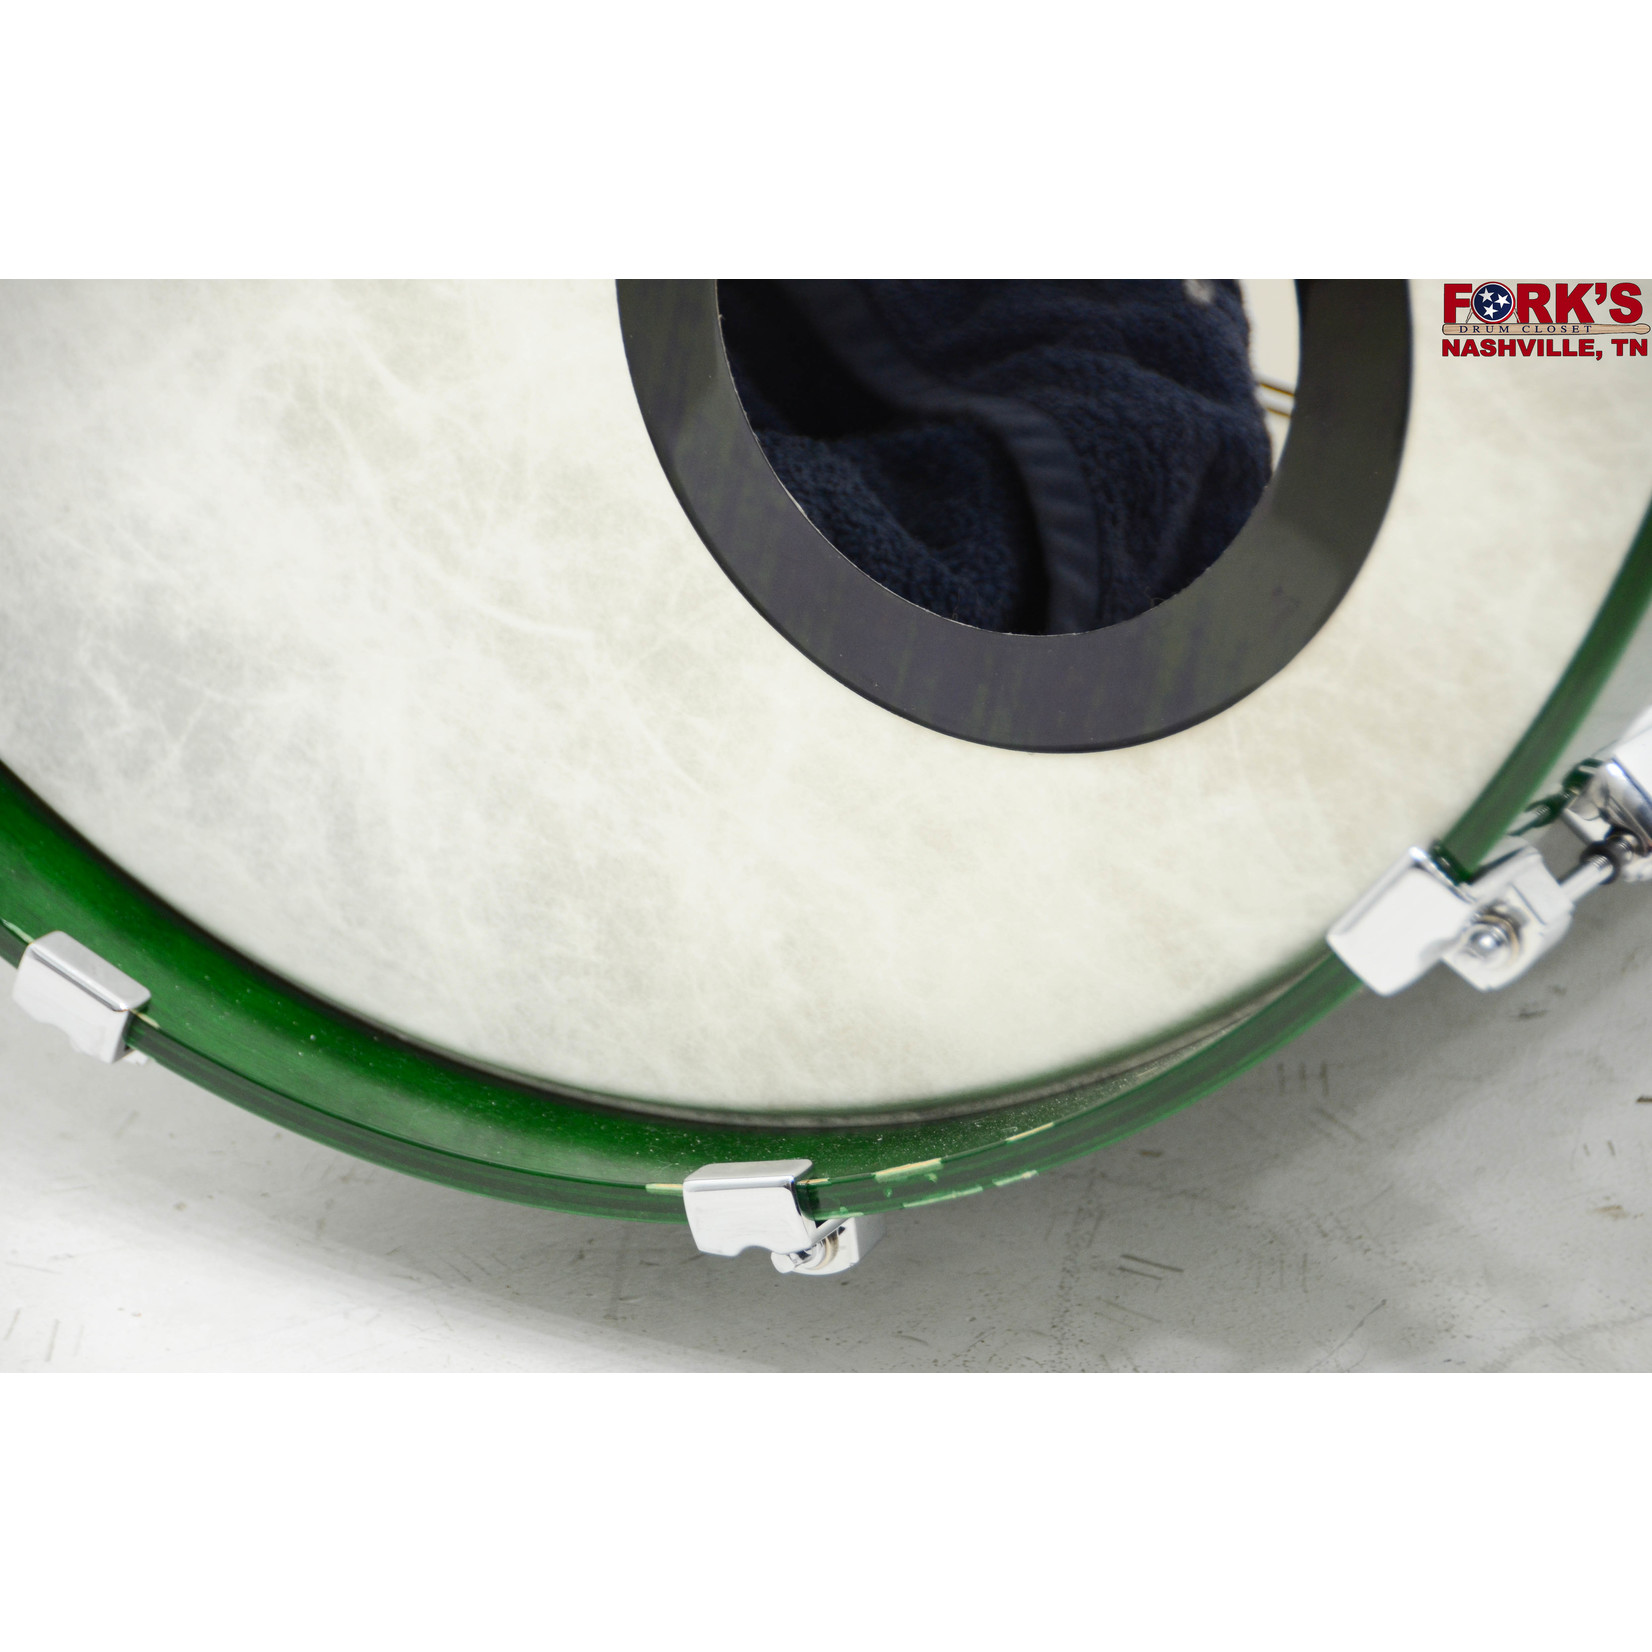 Tama Used Tama Starclassic Maple 3pc Drum Kit - "British Racing Green Lacquer" Made in Japan